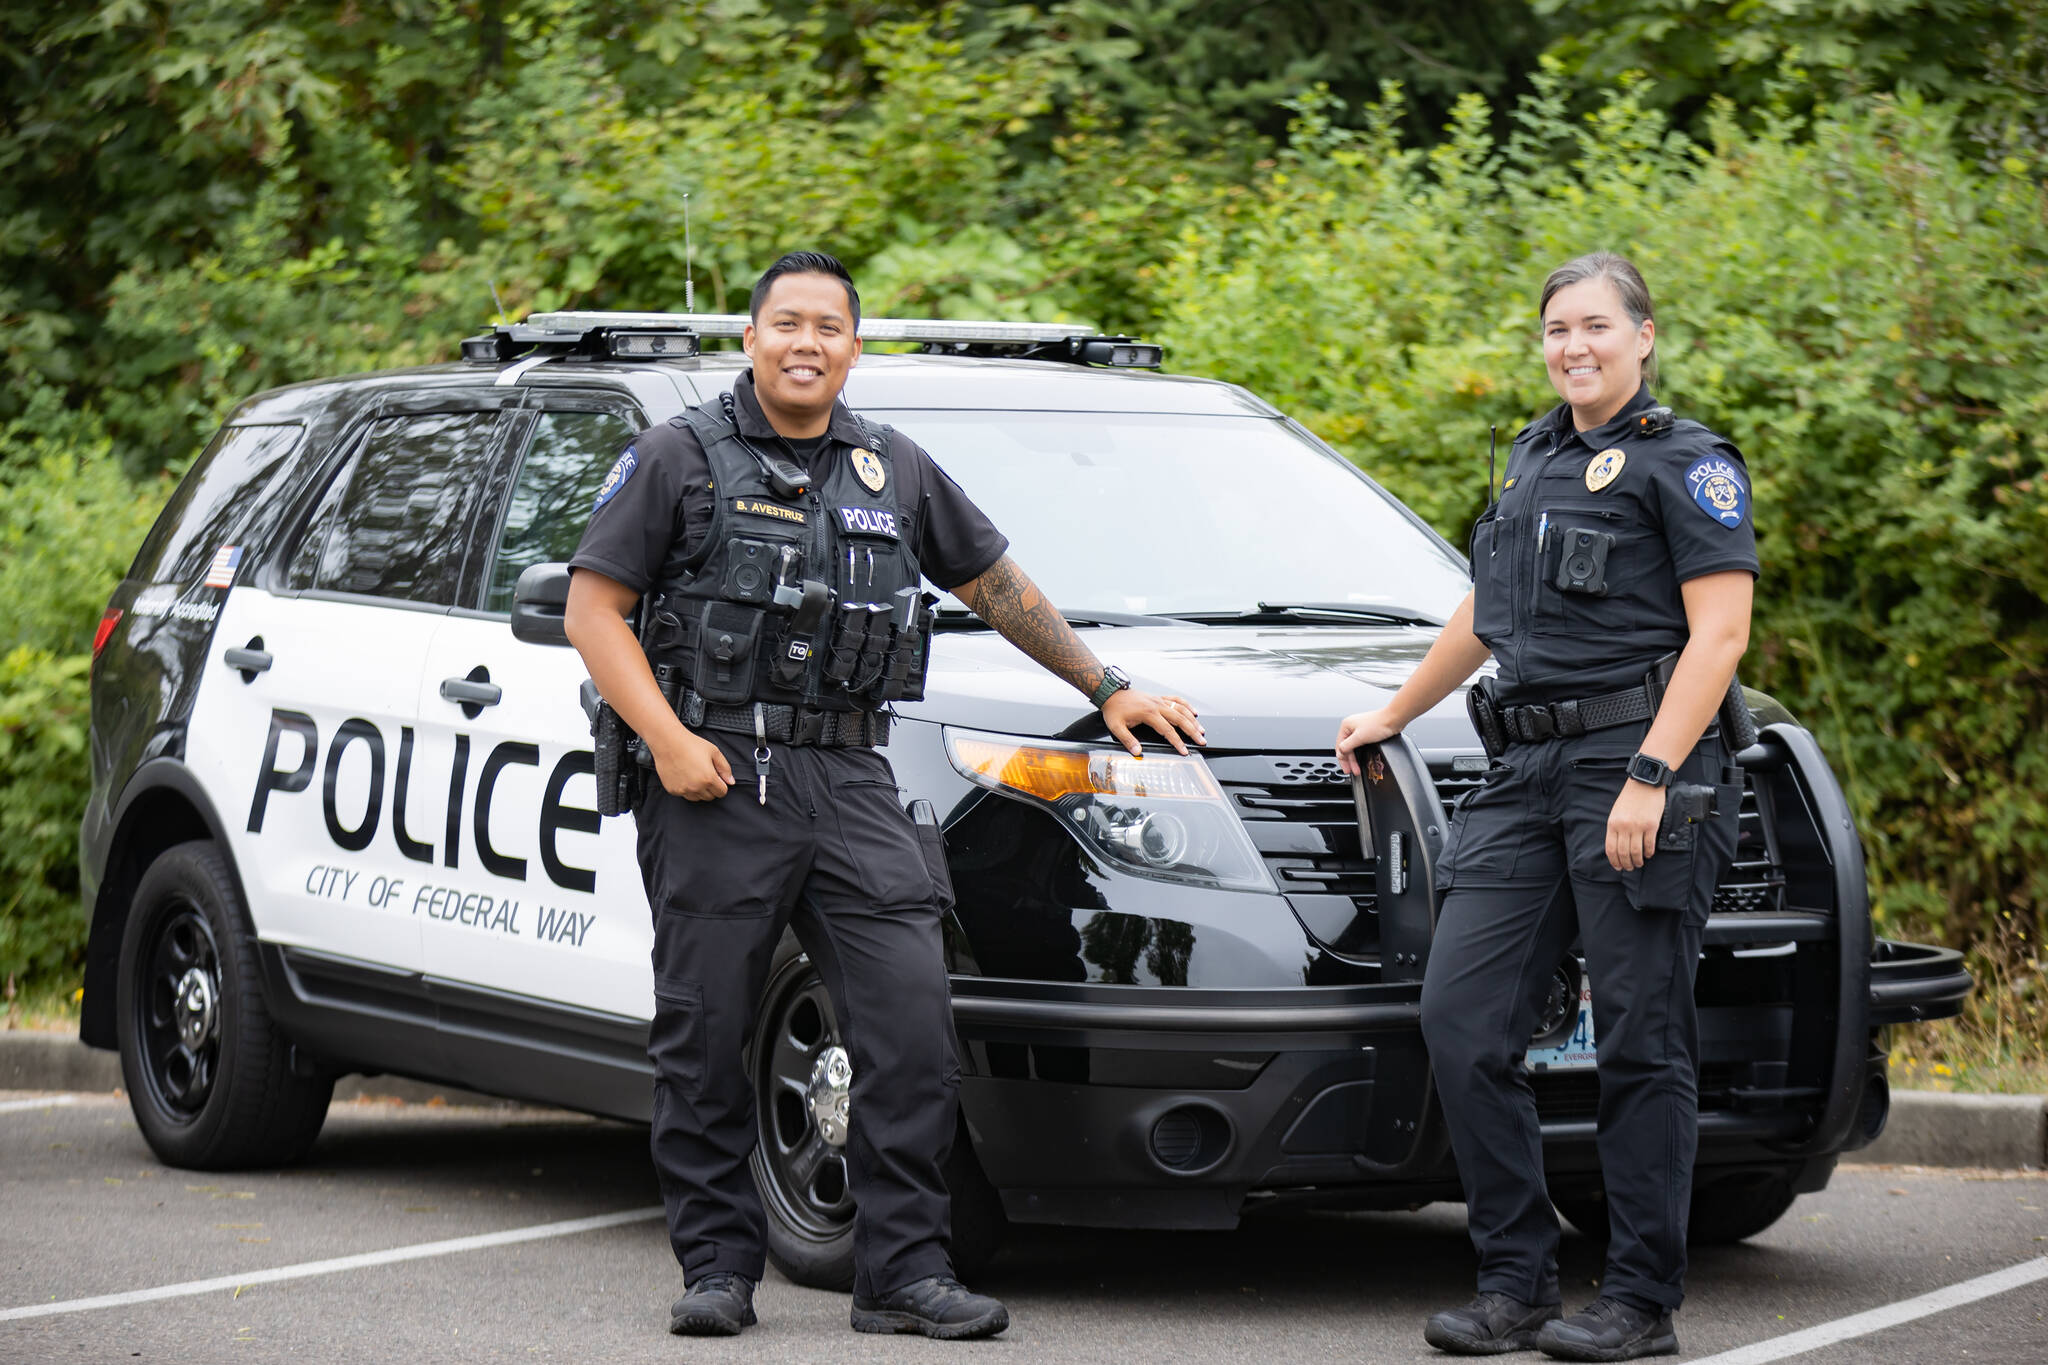   
																Federal Way Police Department earns Washington Association of Sheriffs and Police Chiefs accreditation 
															 